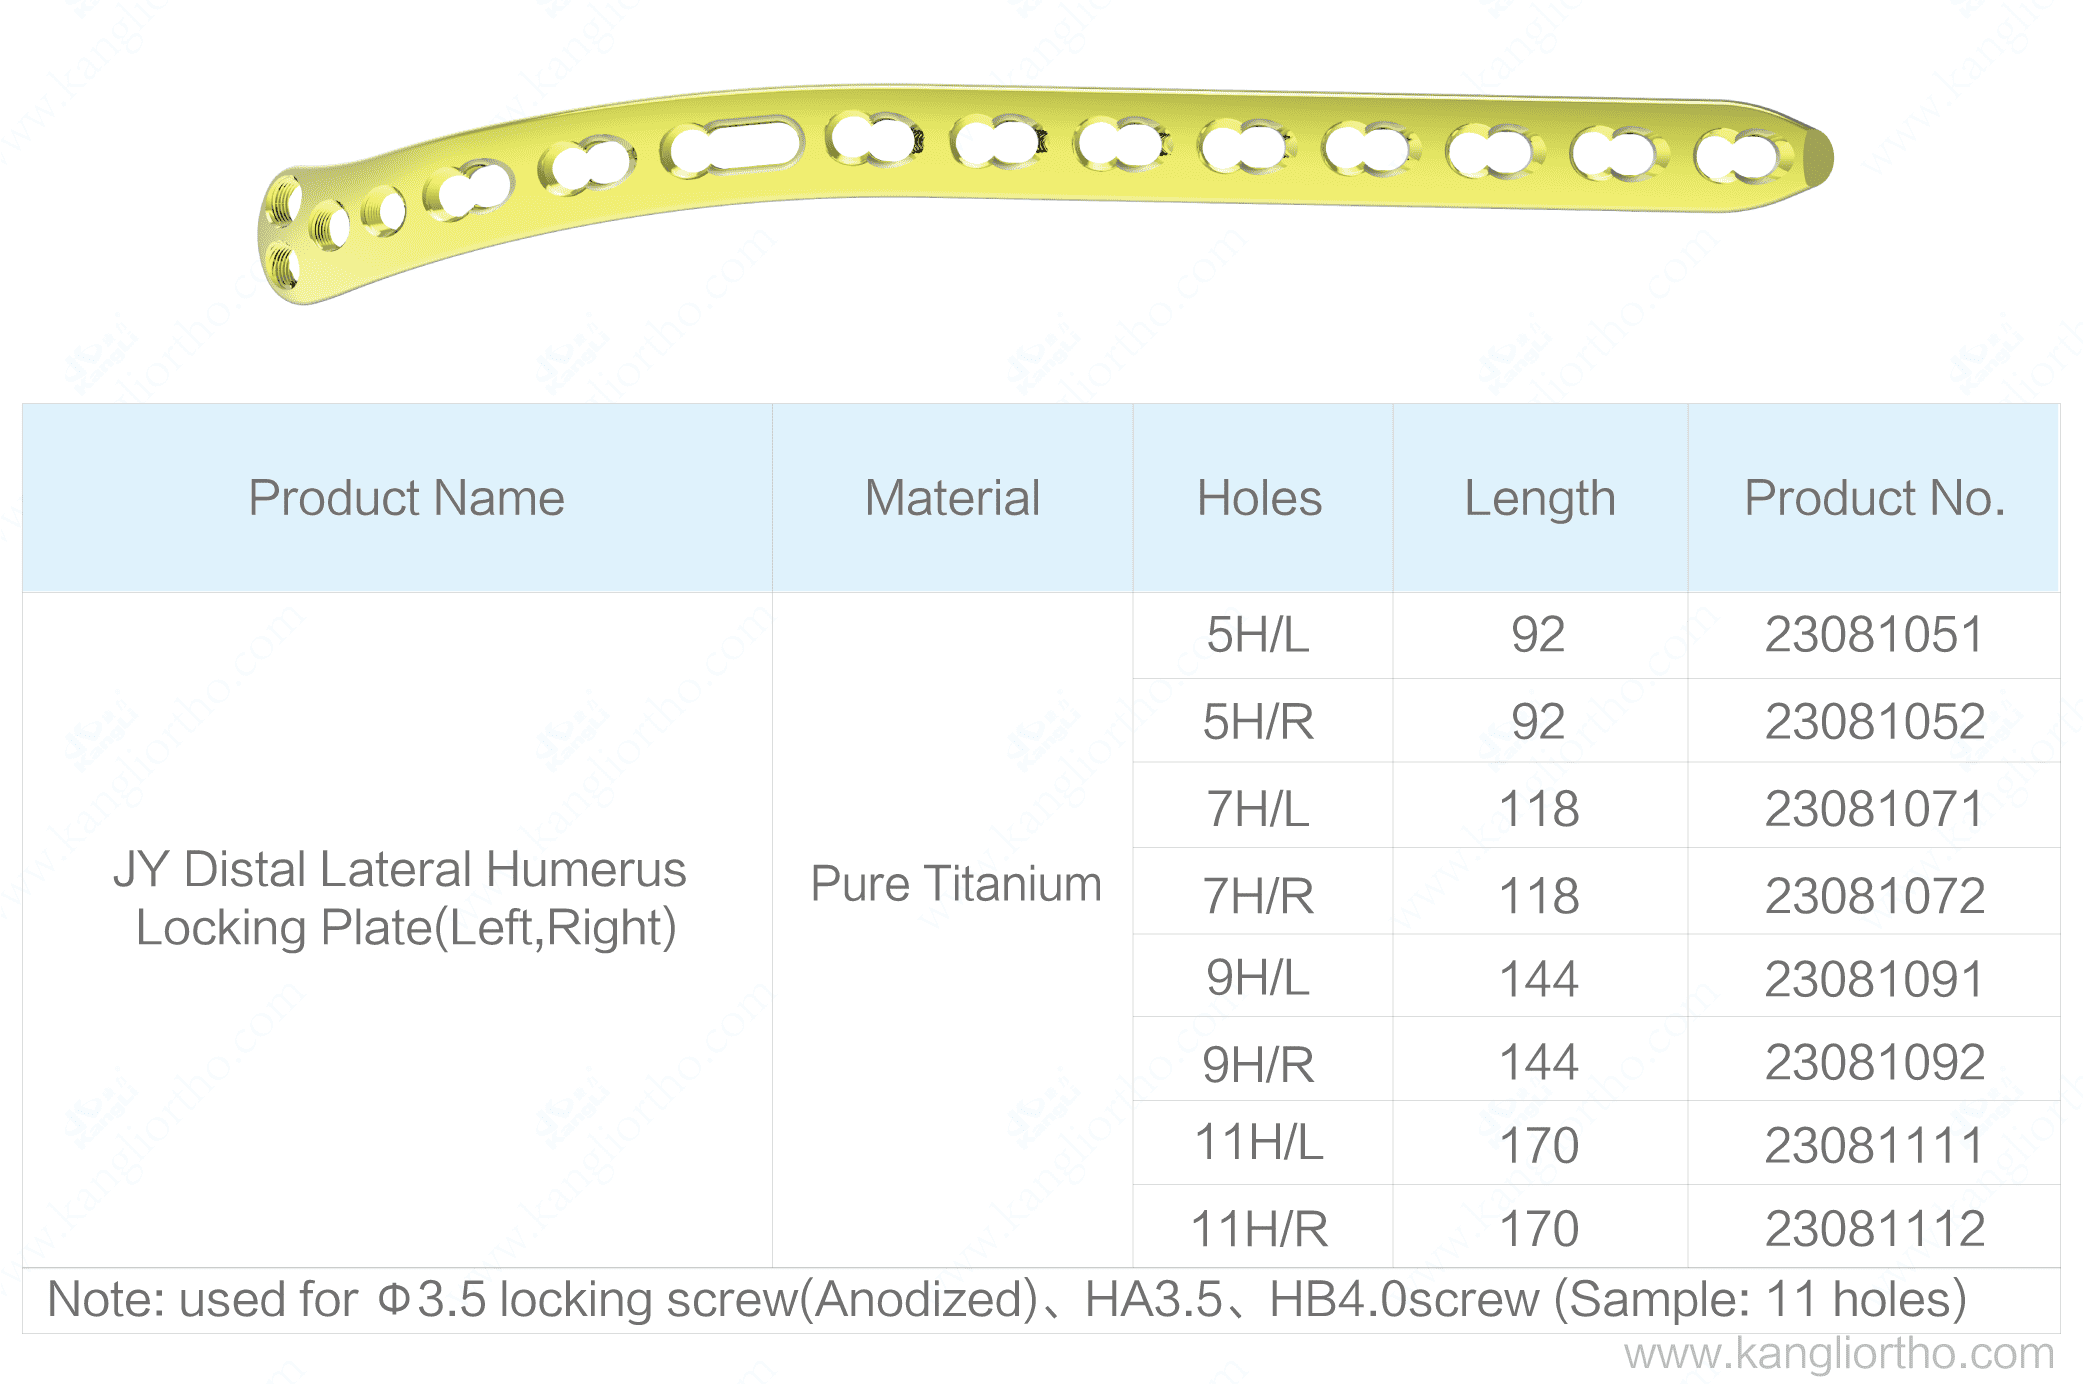 jy-distal-lateral-humerus-locking-plate-specifications